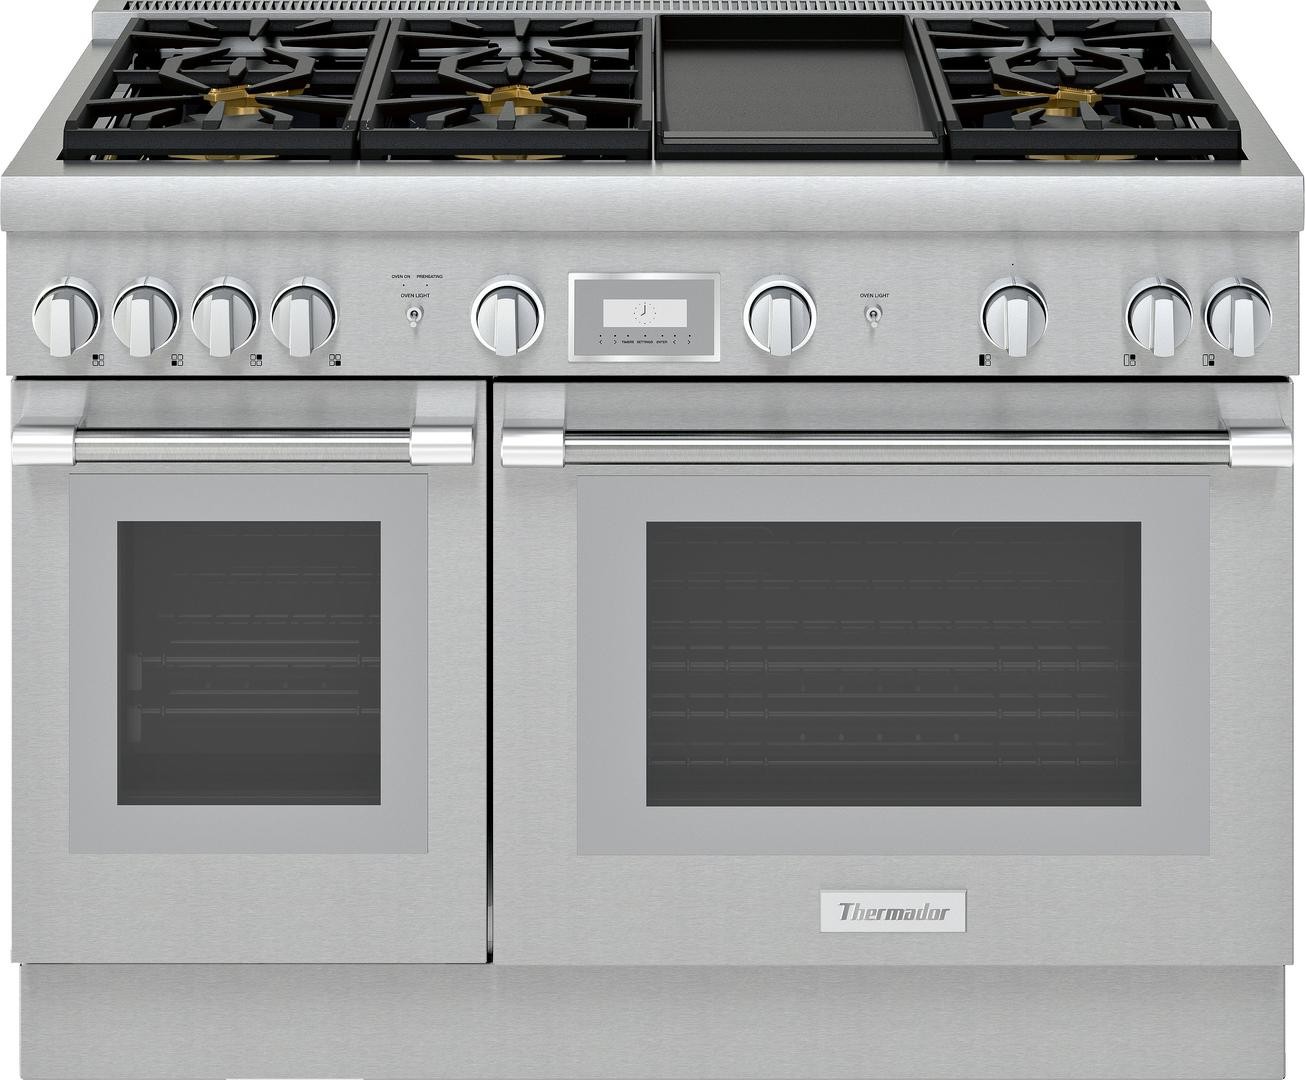 Thermador Gas Professional Range, 48″/121 cm, Pro Harmony Professional Series, Stainless Steel